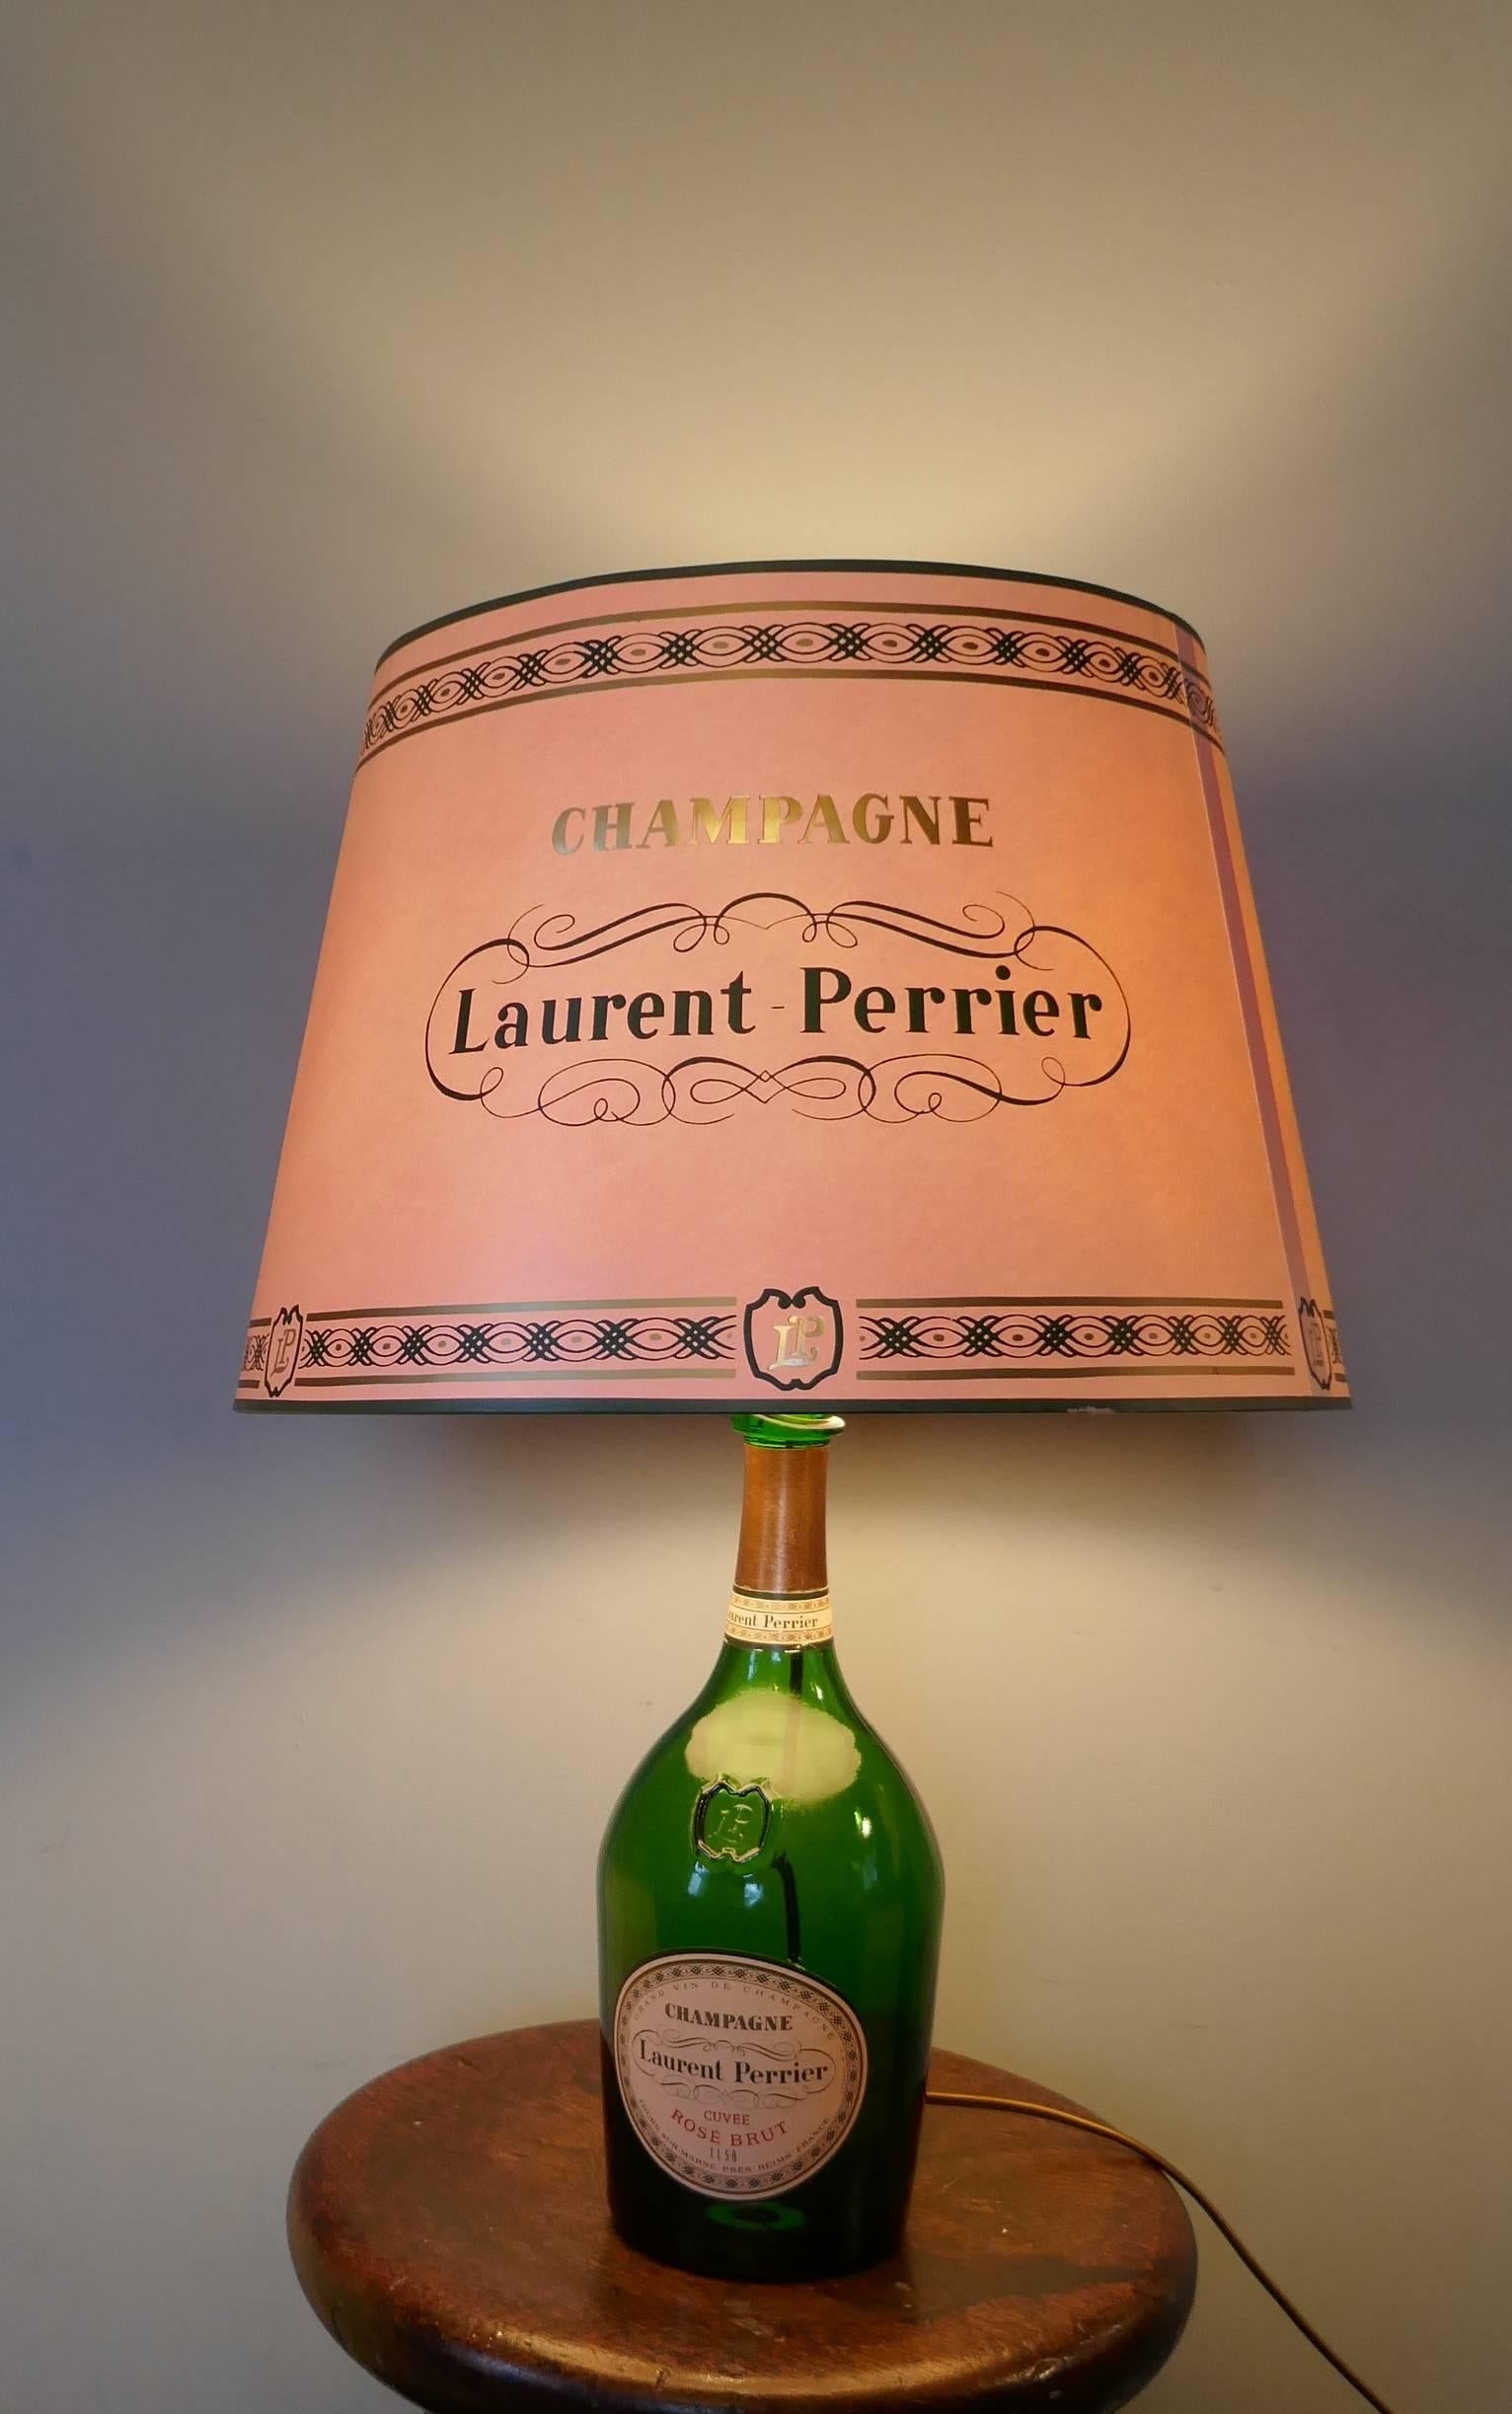 Laurent Perrier Champagne cuveé rose brut advertising table lamp


Fresh from France this superb lamp was part of a Chateau display, it is a genuine 1.5 later bottle and comes with its original matching parchment shade, in pale pink of course to